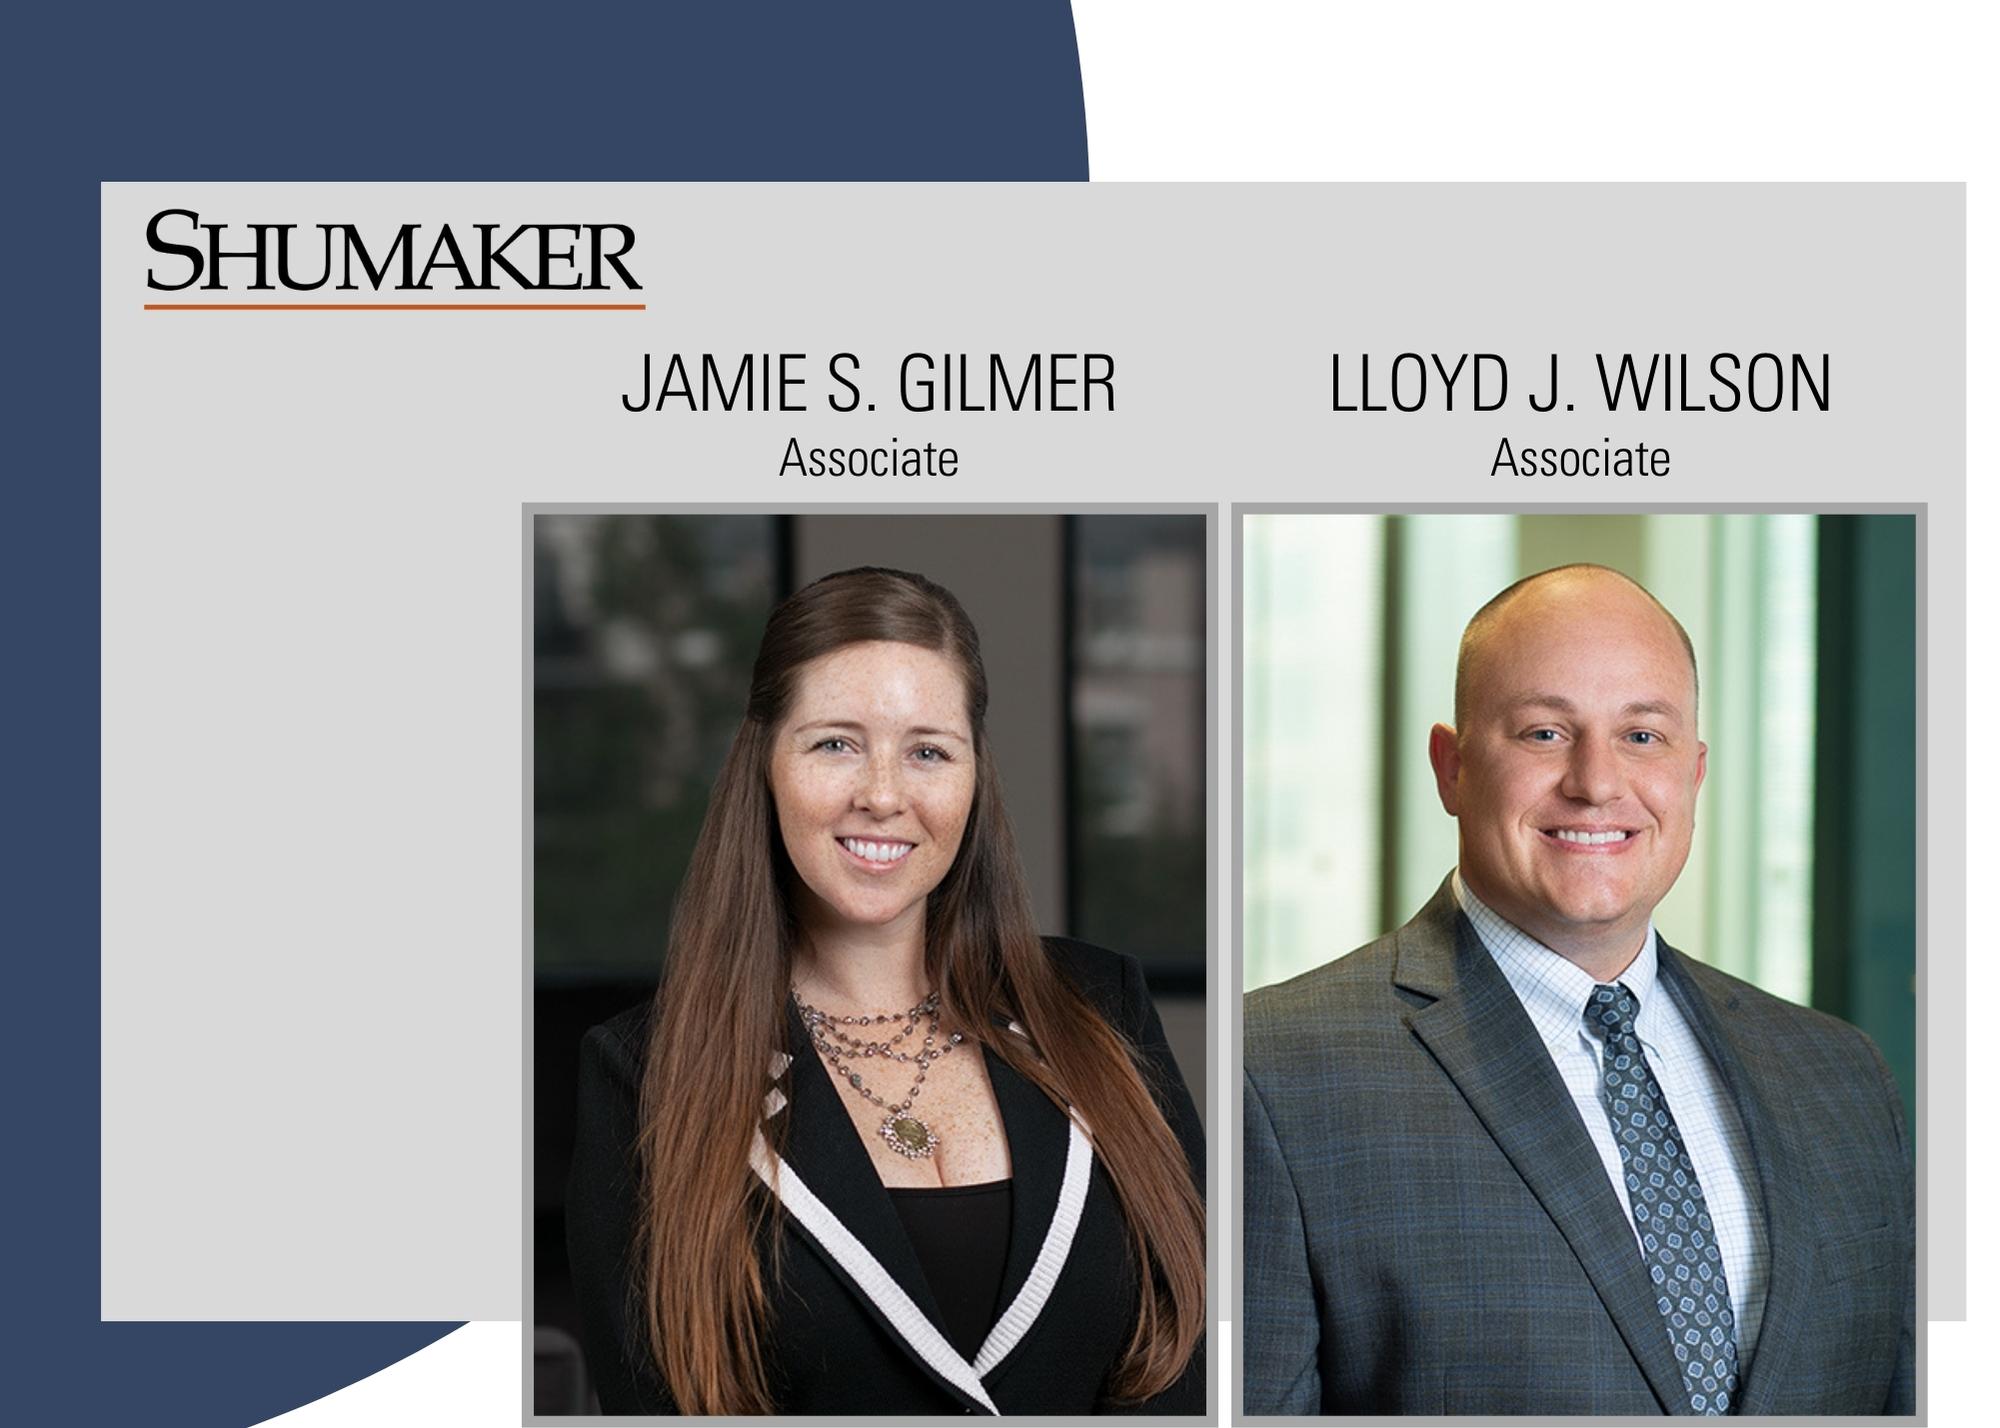 Intellectual Property Licensing Industry Continues to Grow: Shumaker Adds Two Lawyers to Support Demand